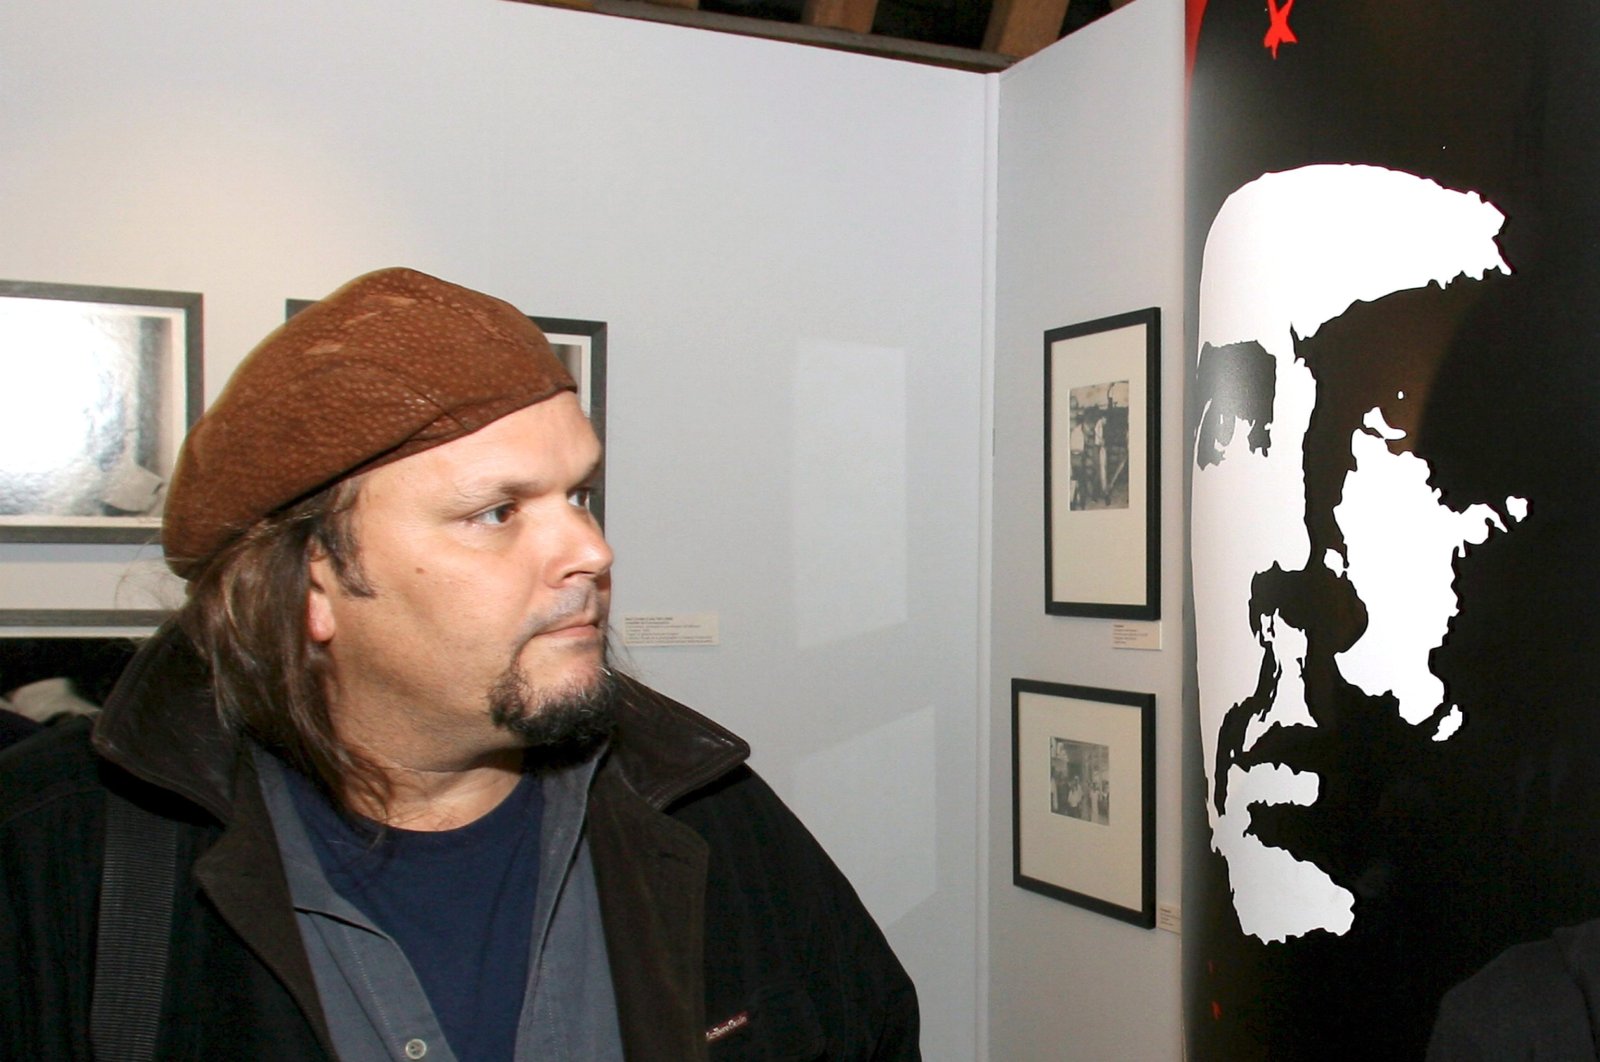 Camilo Guevara attends the exhibition &quot;Che Guevara: 40 years later,&quot; in Brussels, Belgium, Nov. 21, 2007. (EPA Photo)